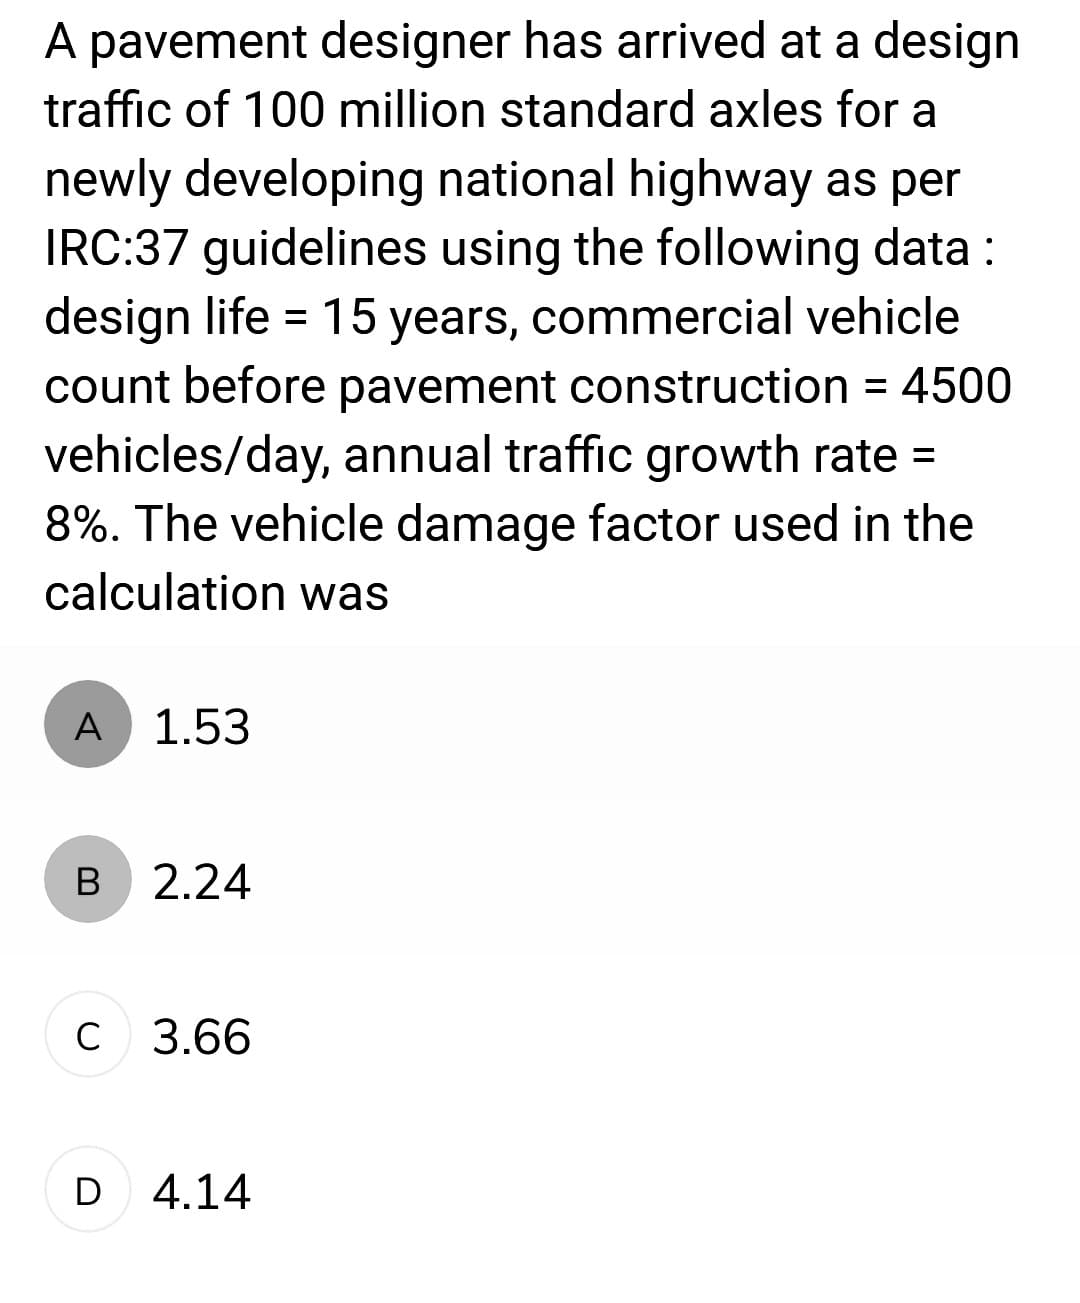 A pavement designer has arrived at a design
traffic of 100 million standard axles for a
newly developing national highway as per
IRC:37 guidelines using the following data:
design life = 15 years, commercial vehicle
count before pavement construction = 4500
vehicles/day, annual traffic growth rate =
8%. The vehicle damage factor used in the
calculation was
A
B
с
1.53
2.24
3.66
D 4.14